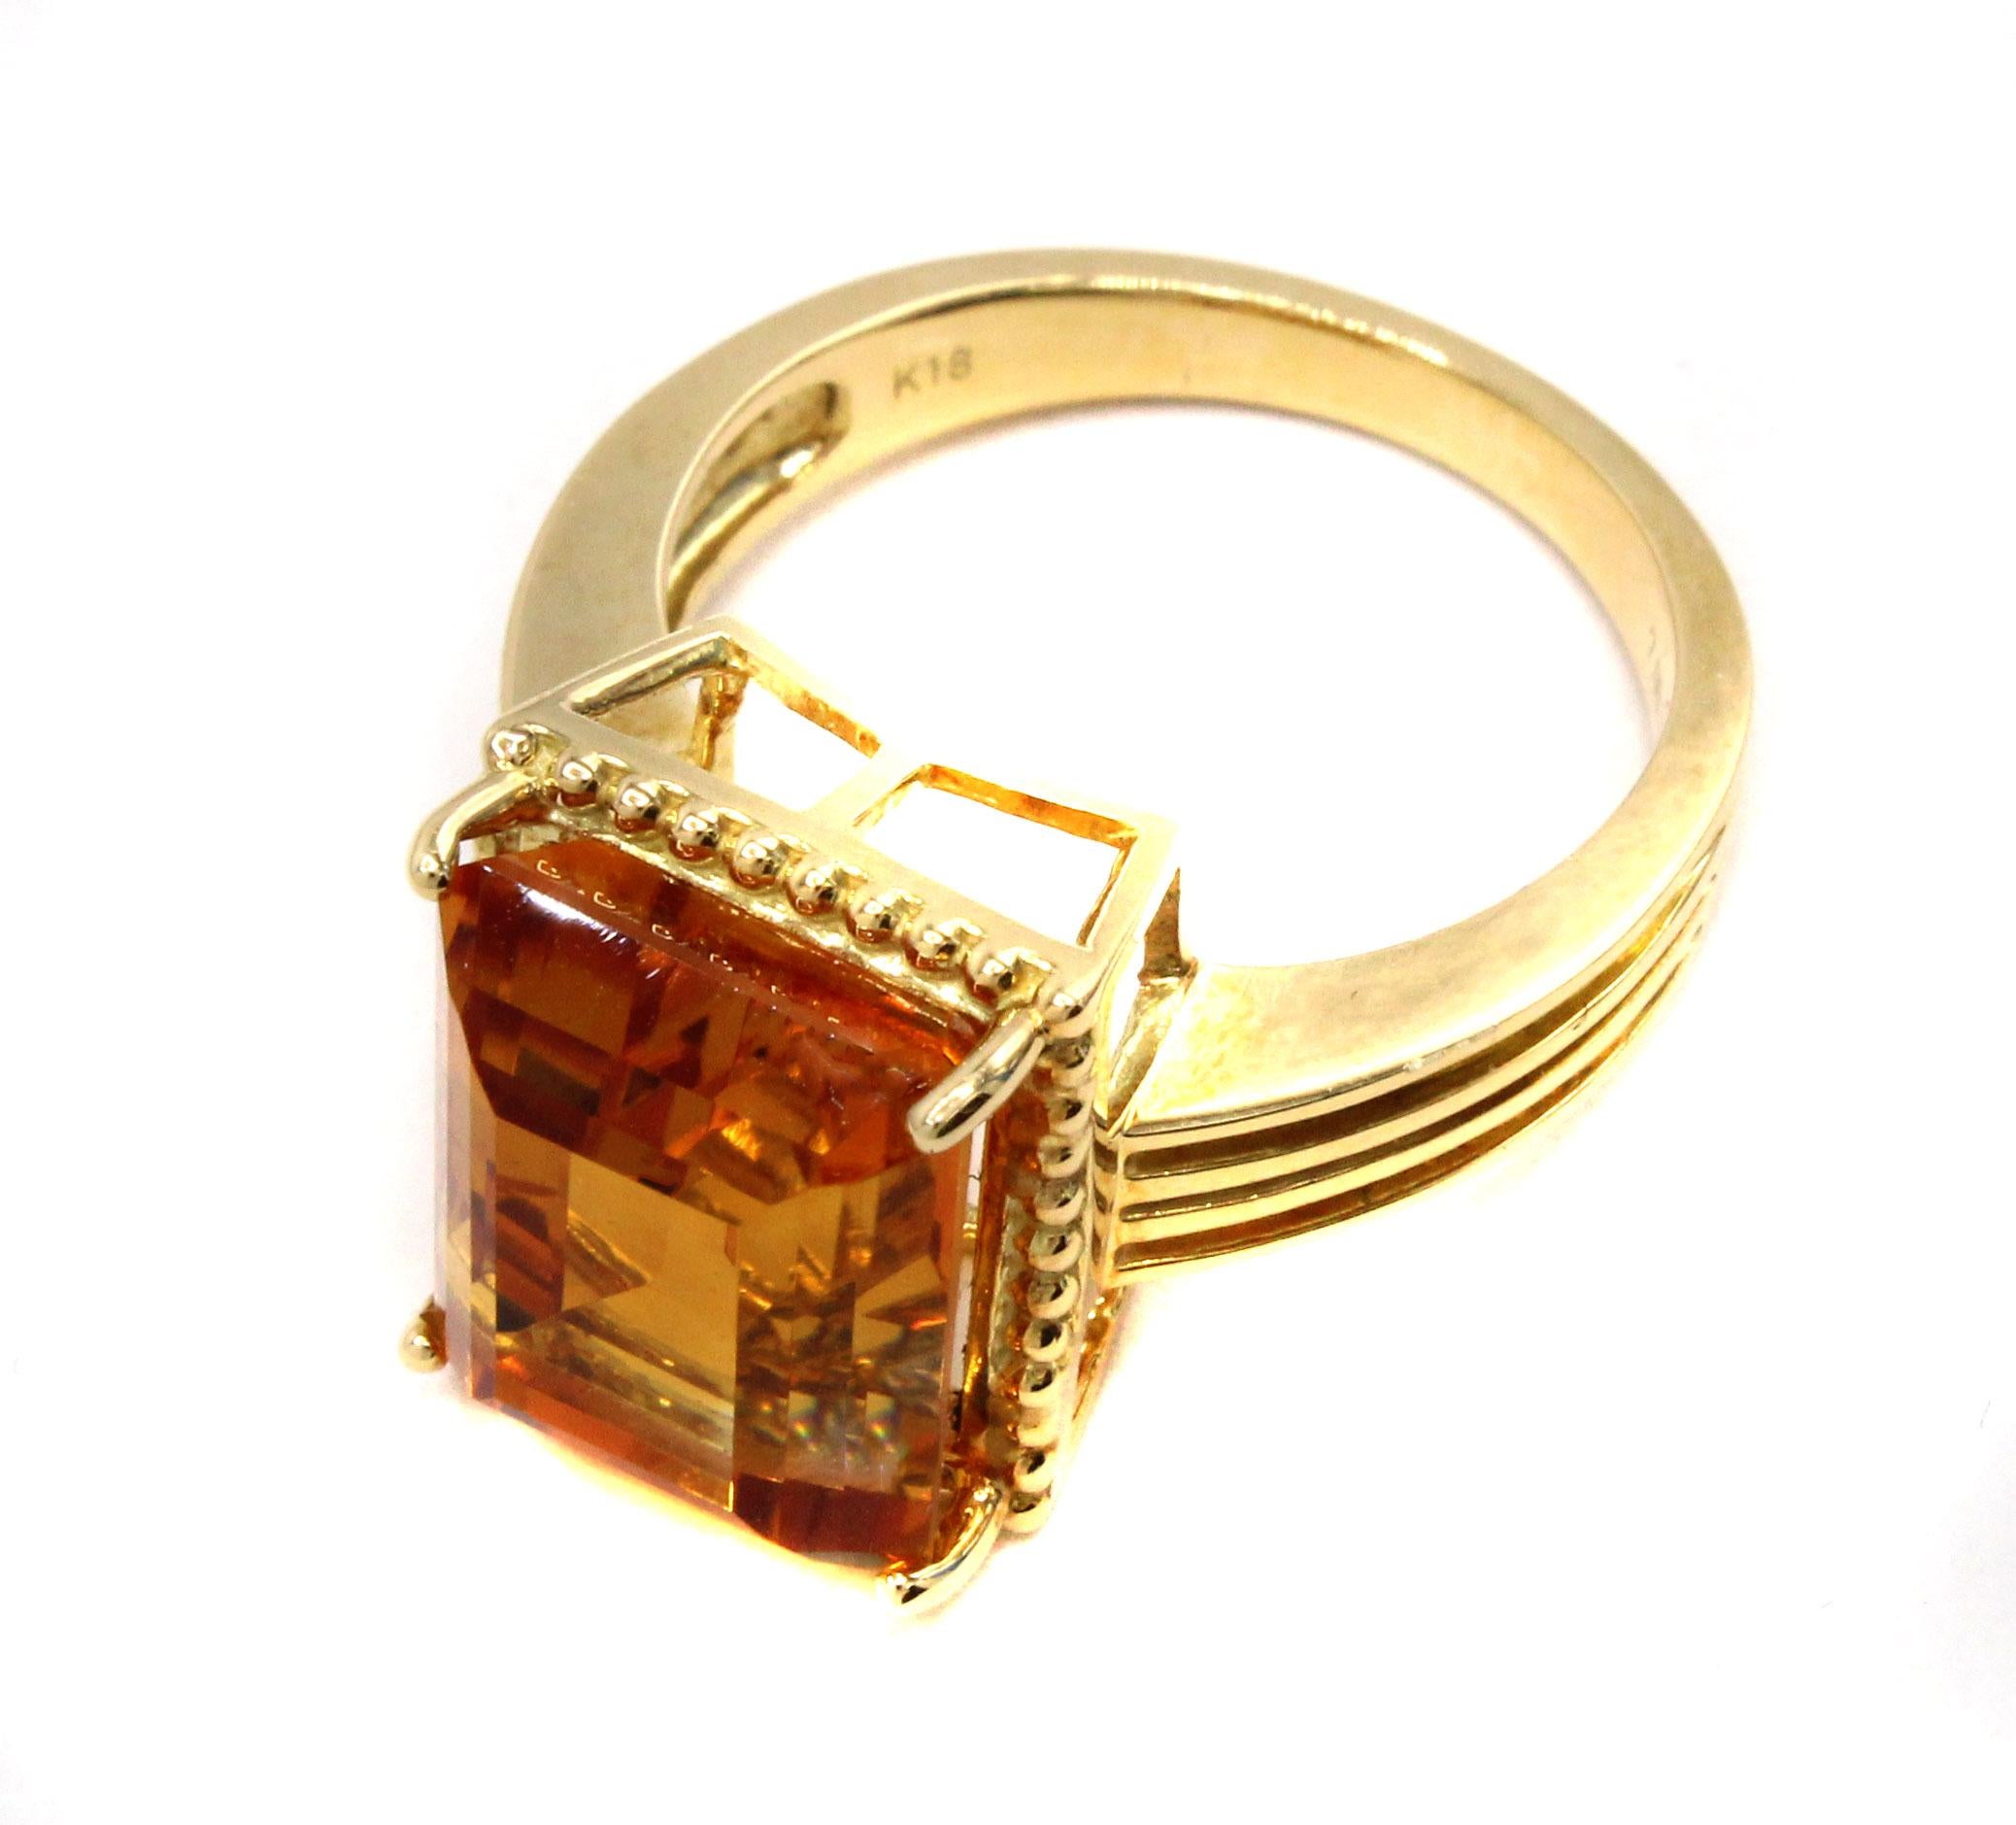 Beautifully designed and well handcrafted this stylish 1980s ring features a vibrant emerald cut Golden Citrine. The perfectly cut center gemstone has an amazing color saturation and is full of life and fire. Measured to weigh approximately 7